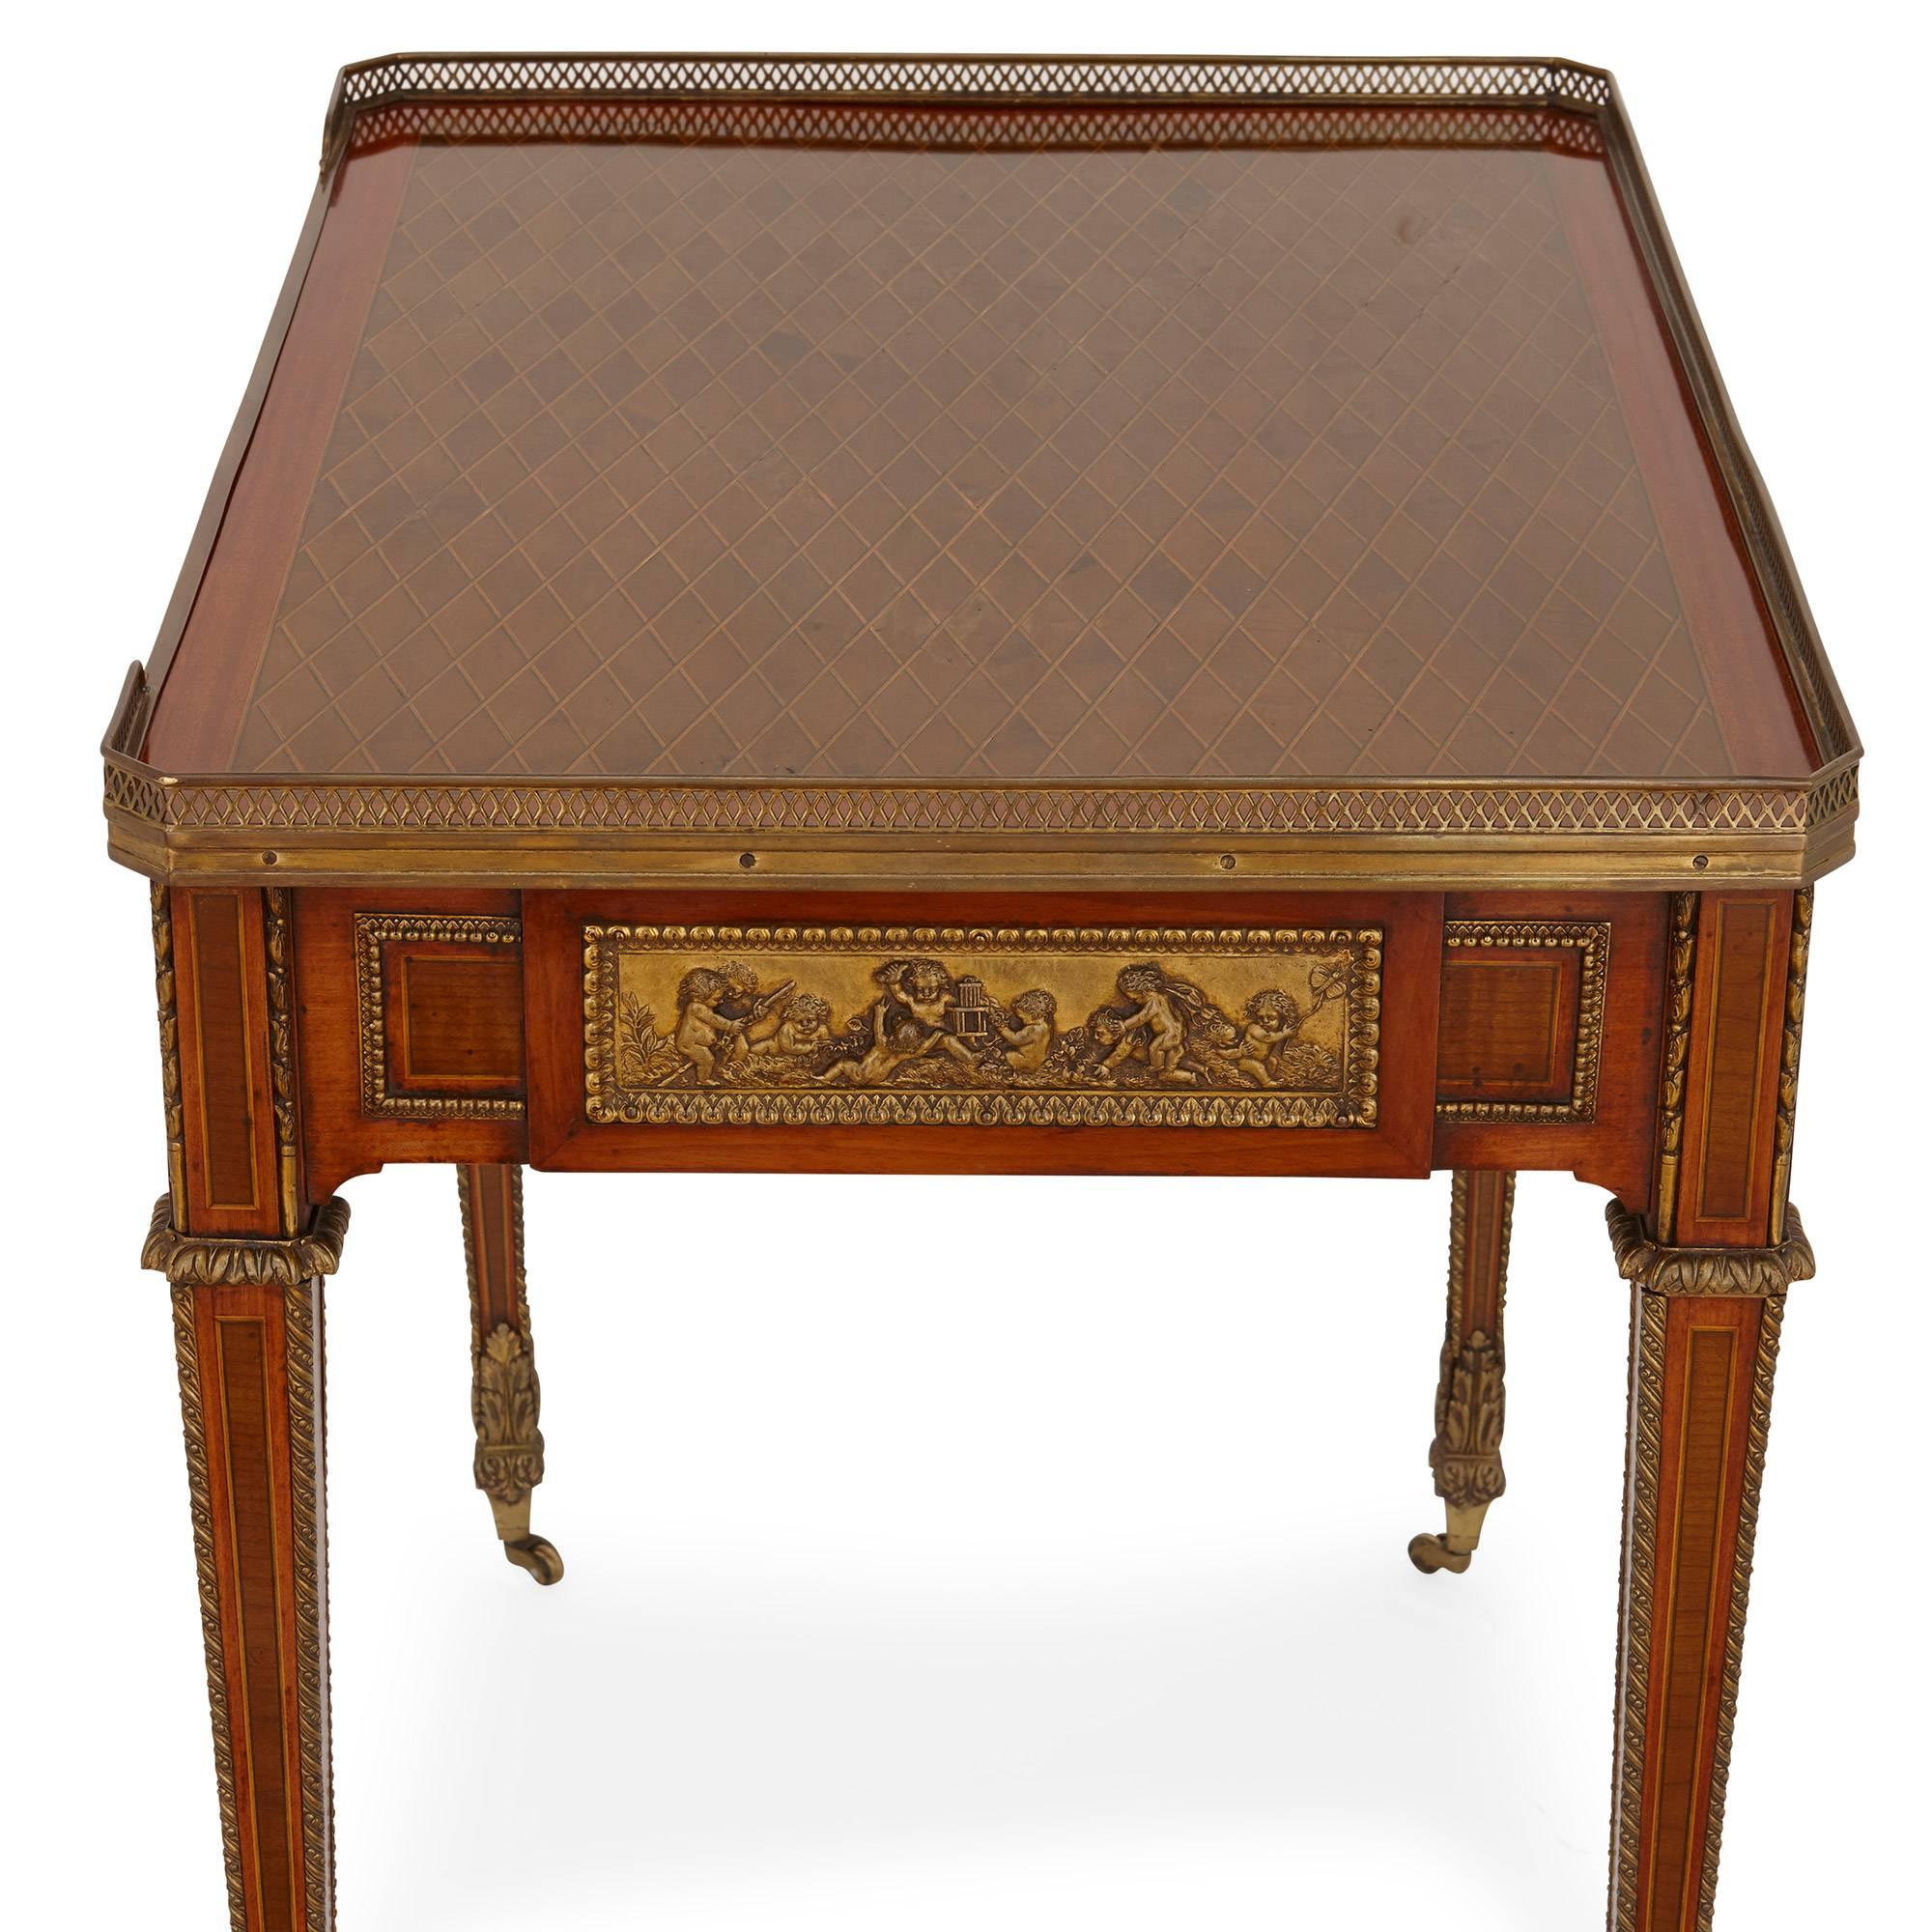 19th Century French Antique Ormolu Mounted Parquetry Writing Table, after Riesener